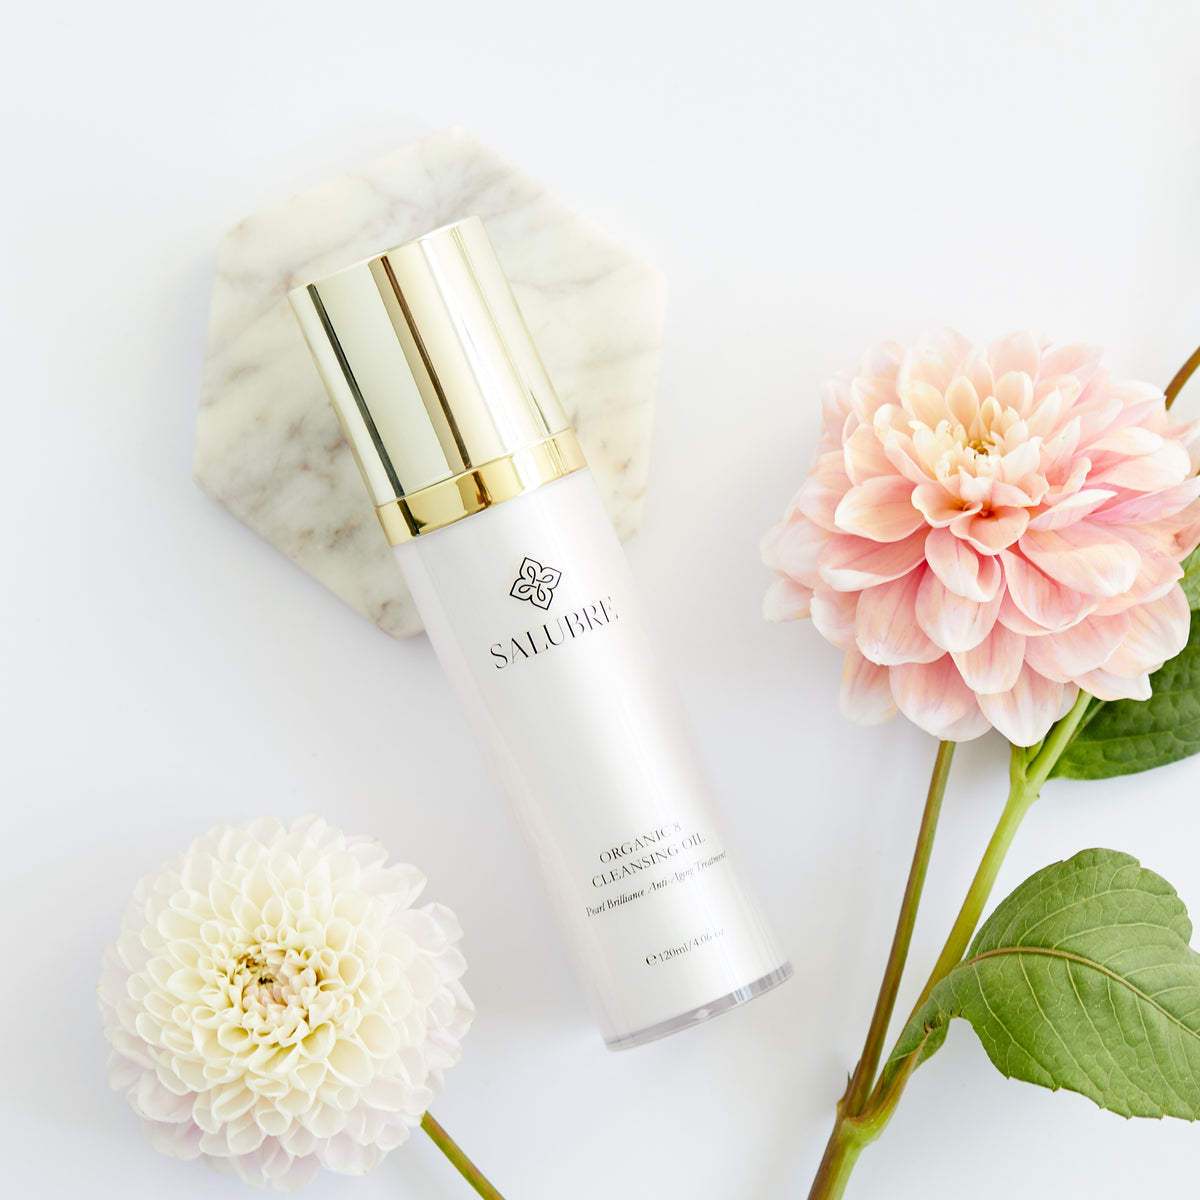 Gently remove impurities and make up with our Organic Anti-Ageing Cleansing Oils